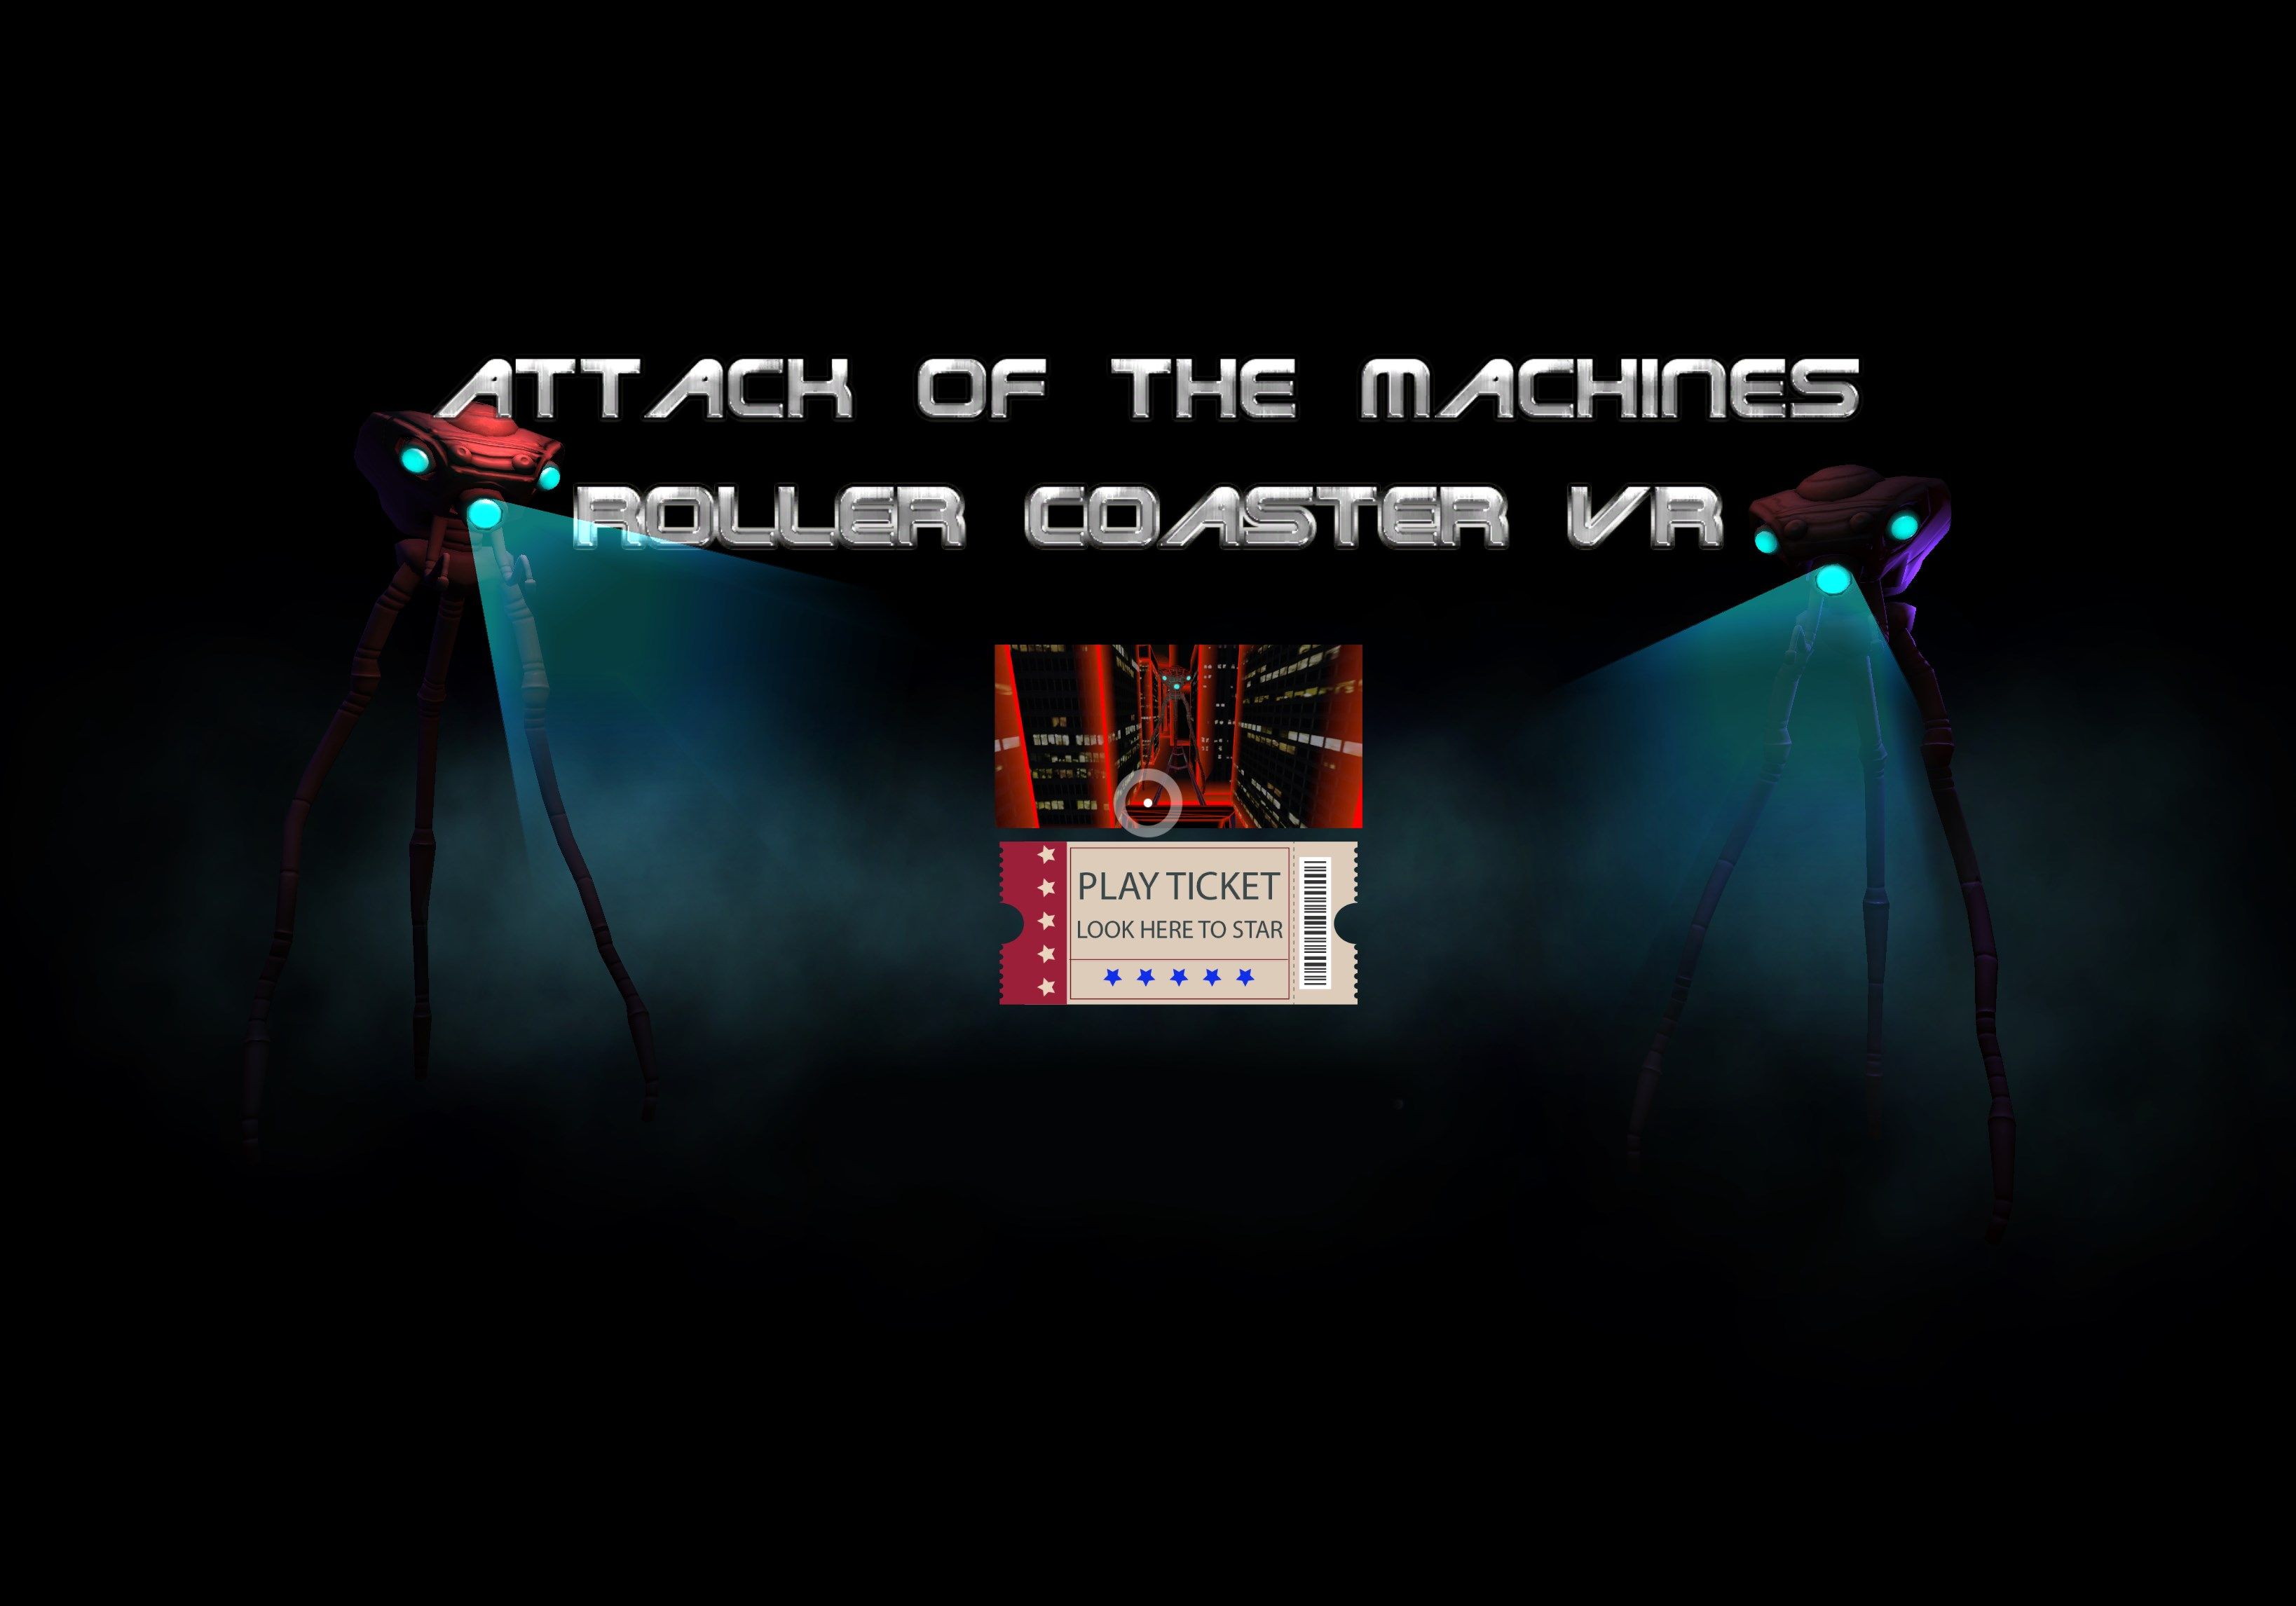 Attack of the Machines Roller Coaster VR